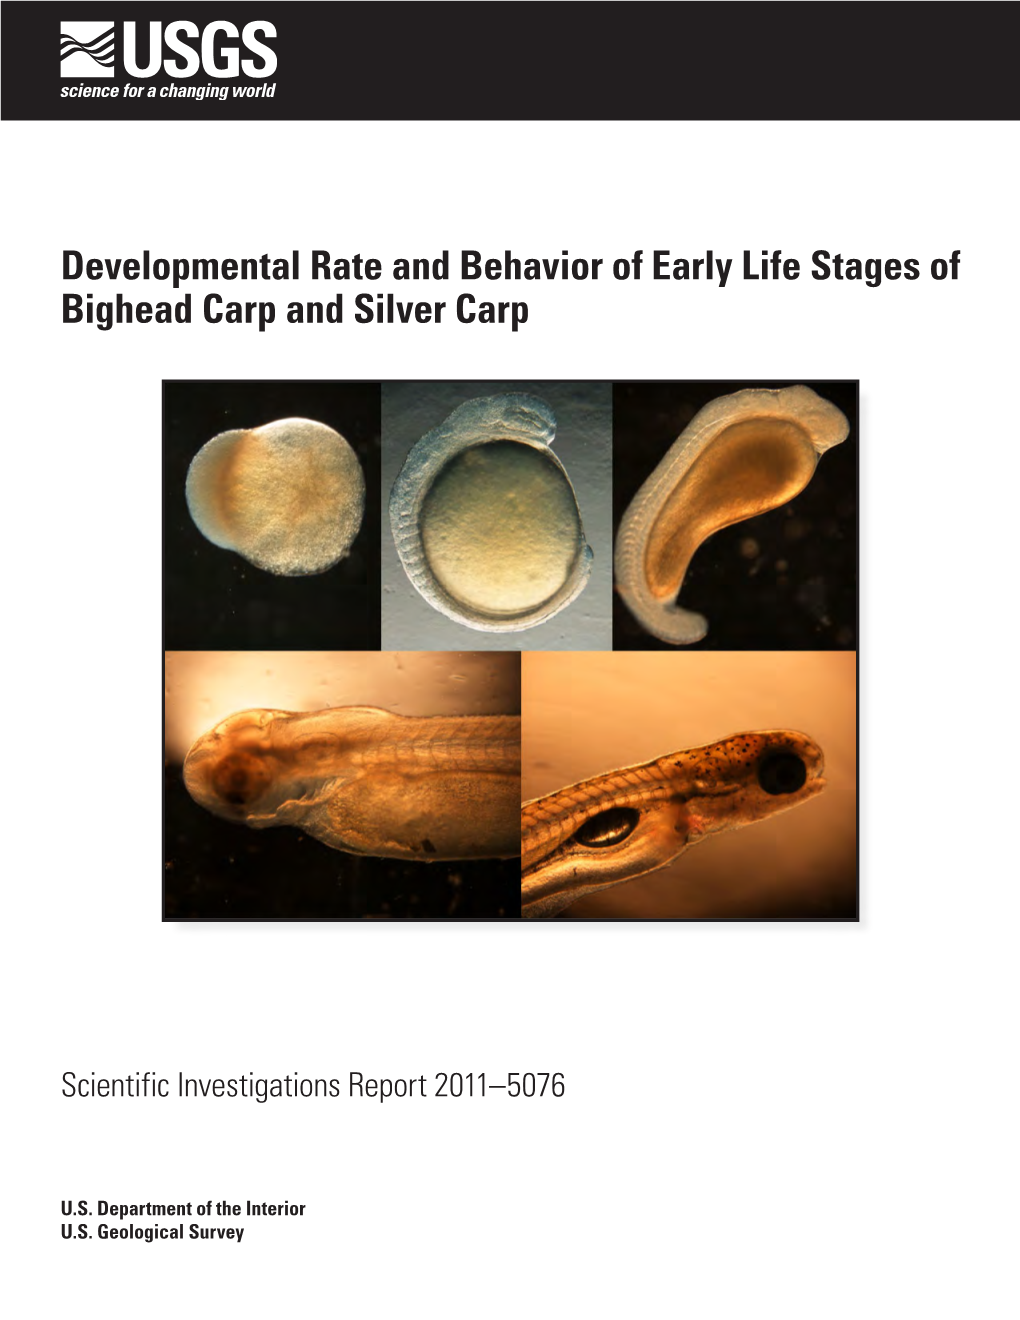 Developmental Rate and Behavior of Early Life Stages of Bighead Carp and Silver Carp